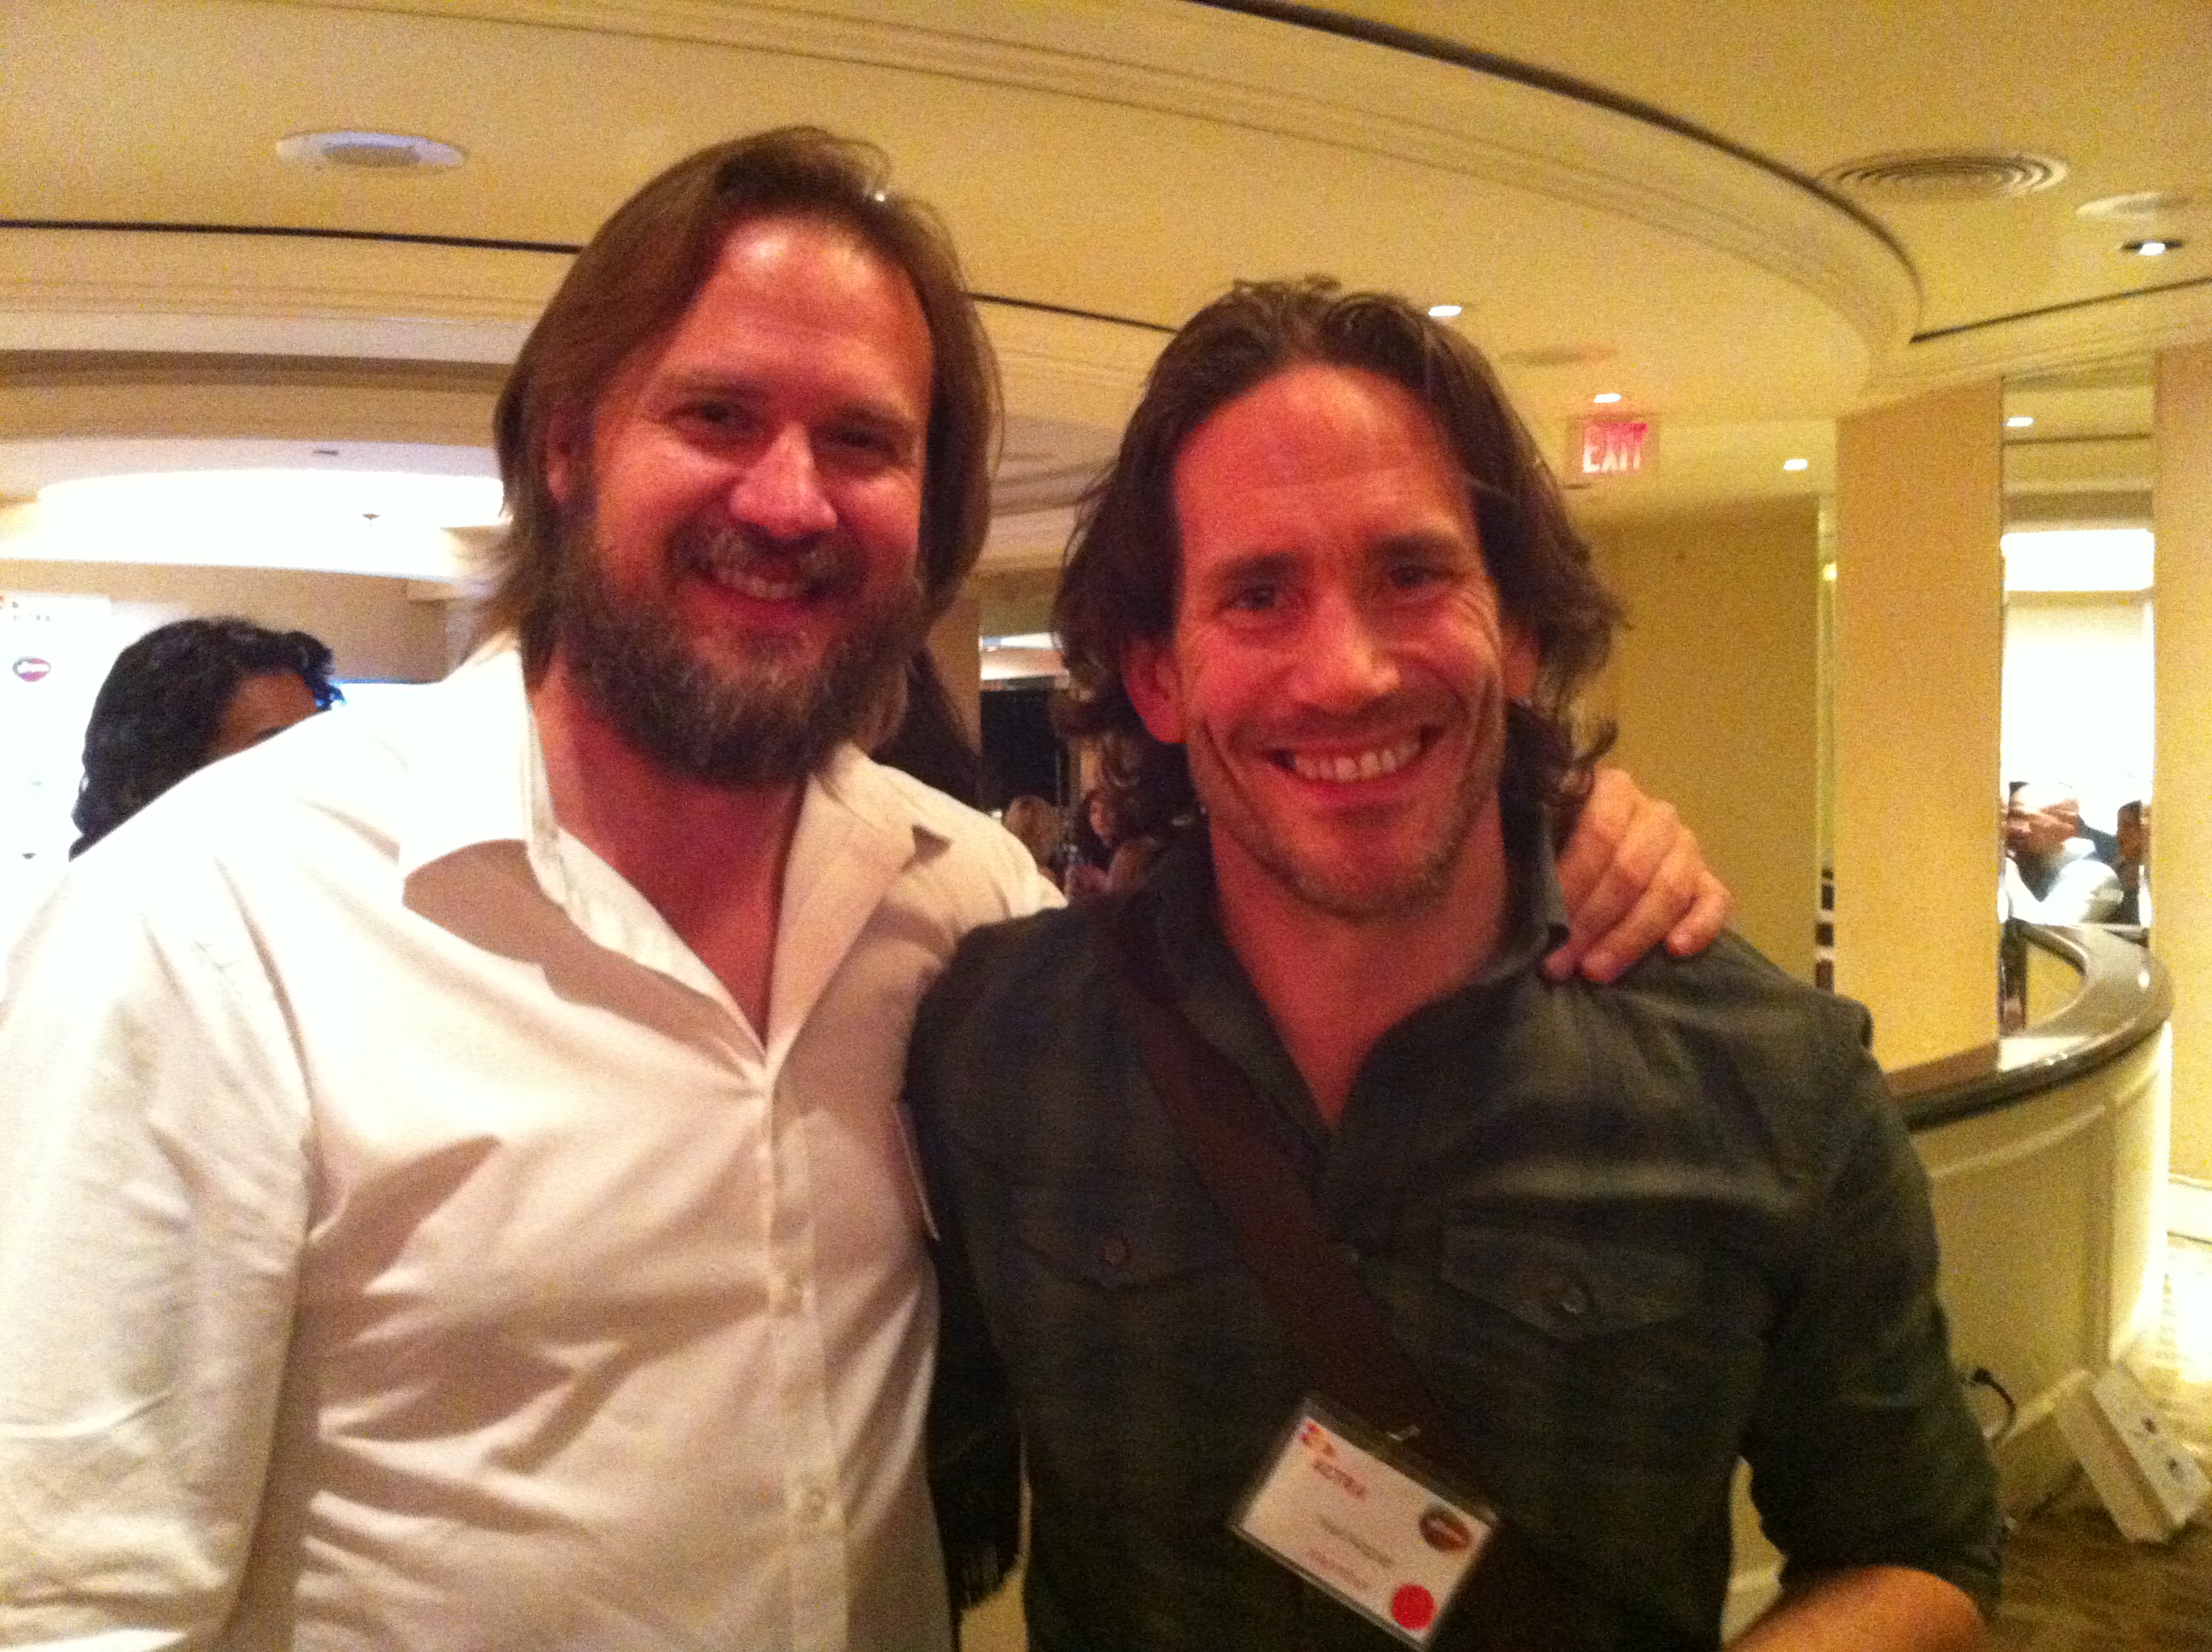 Sheldon Charron with Neil Napier, a fellow Canadian actor who plays Dr. Peter Farragut on SyFy's hit show Helix.